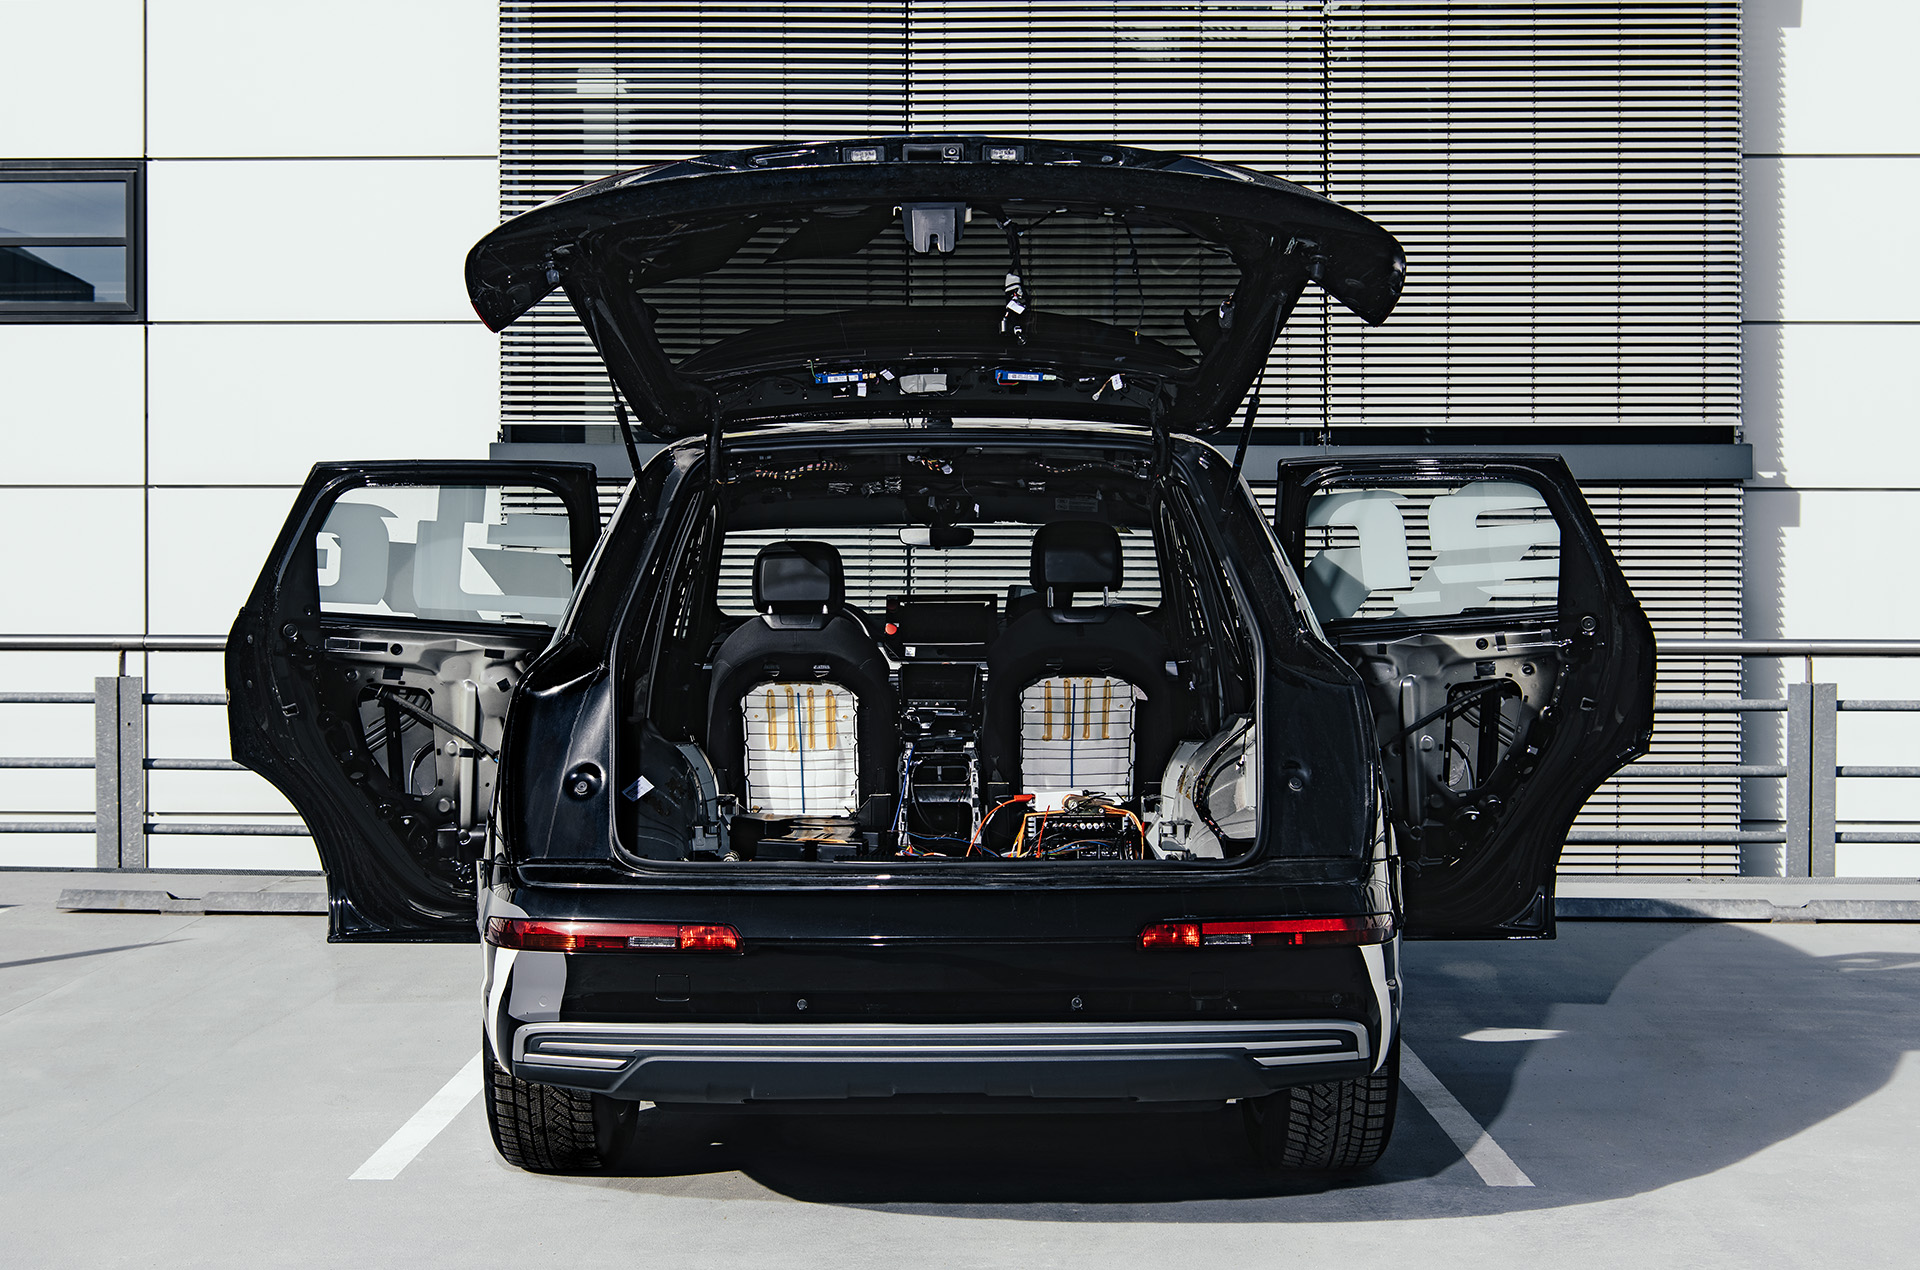 A view from the rear of the Brutus concept car with its tailgate and side doors open to reveal the electronics in the trunk and removed interior panels.